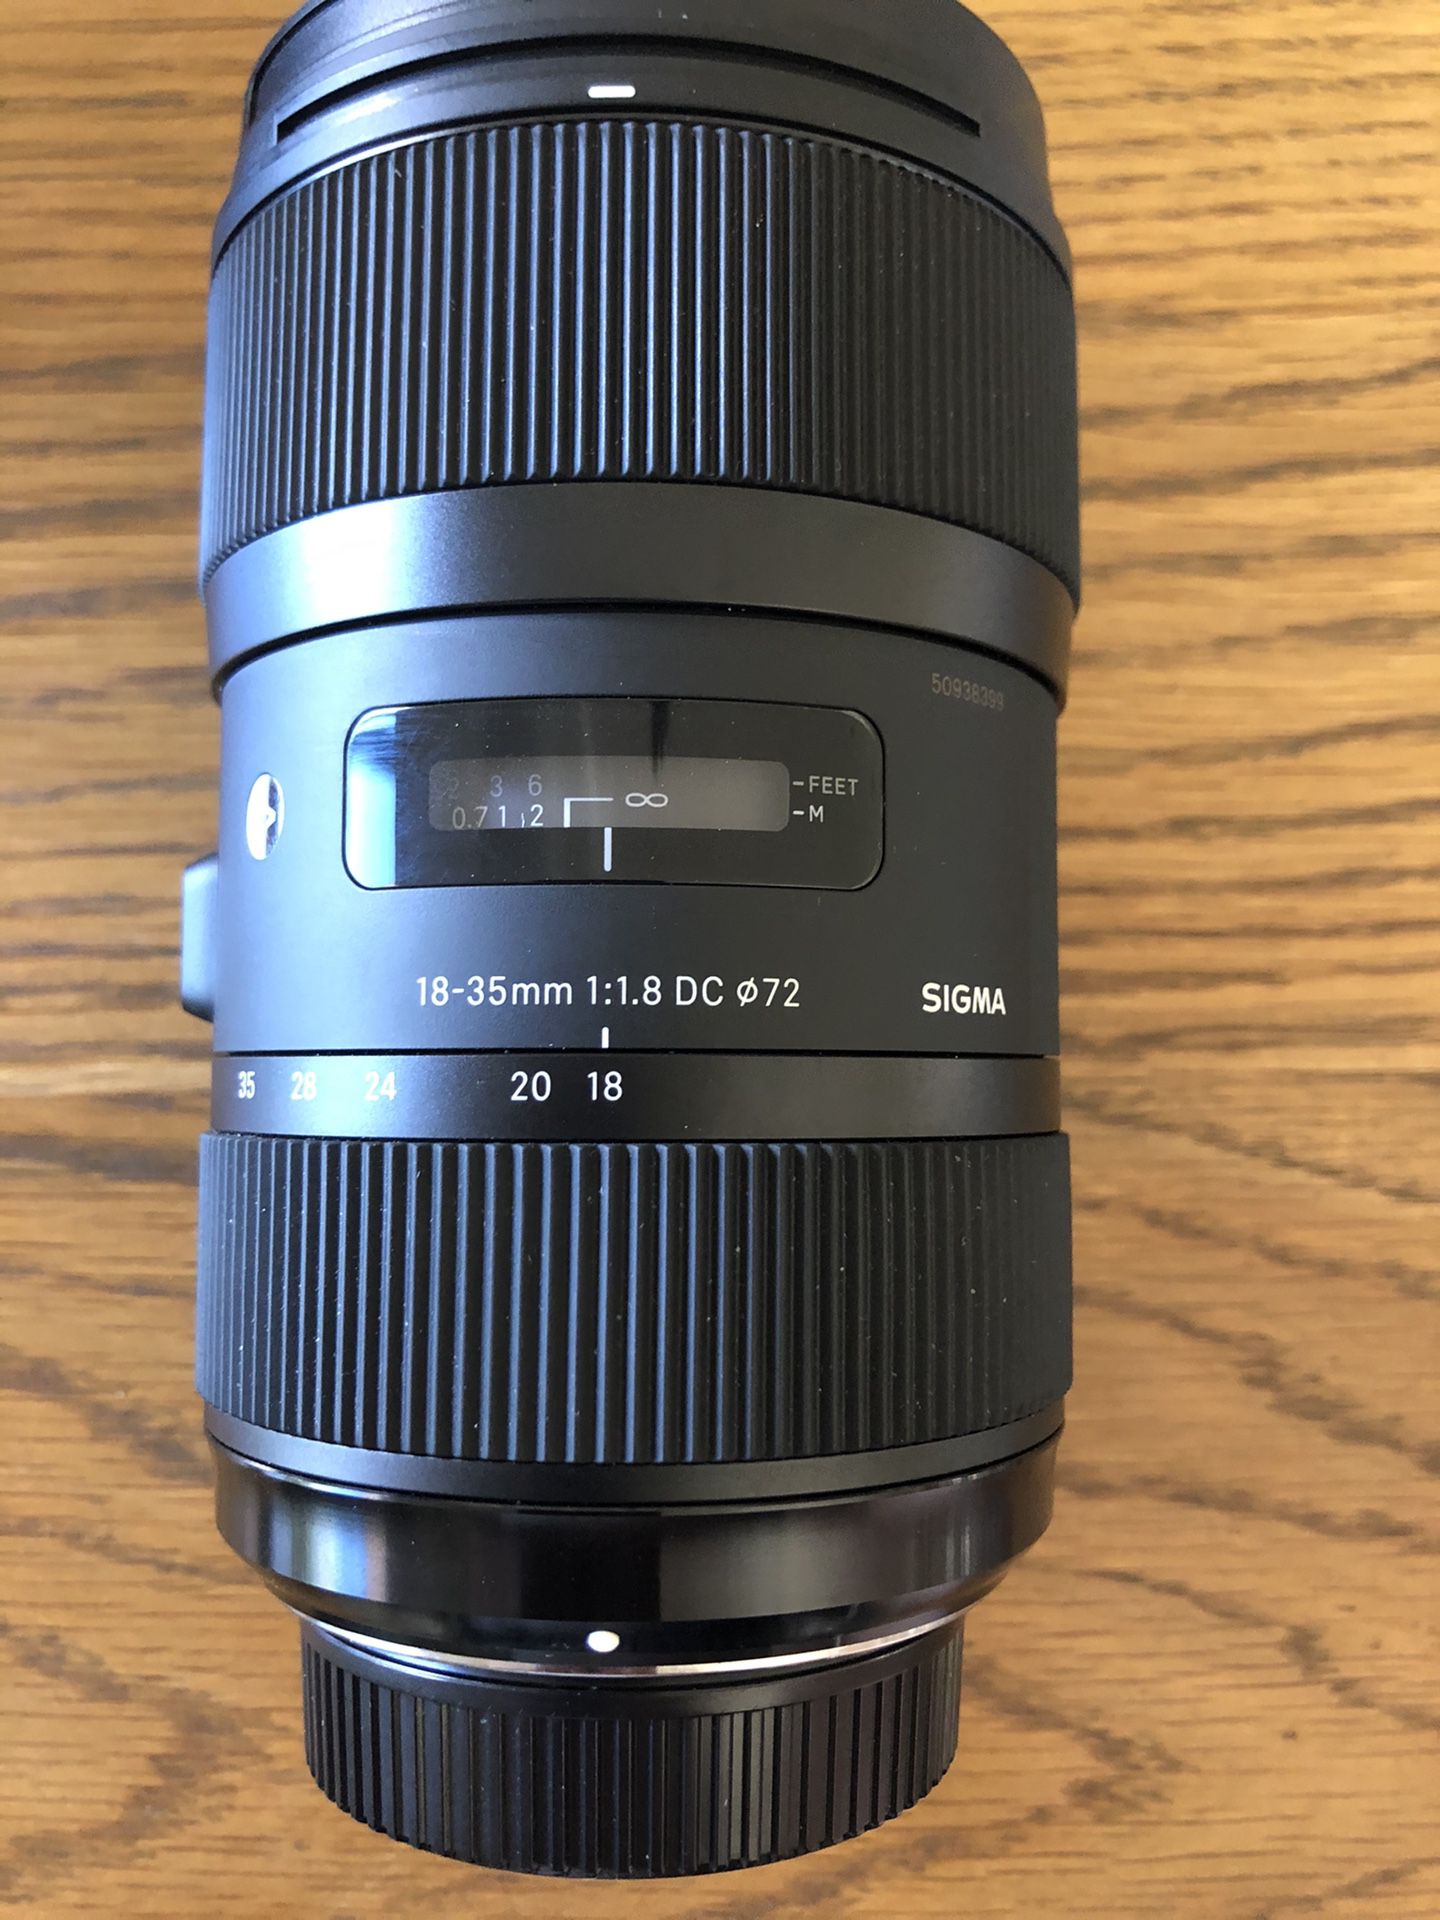 Sigma 18-35mm f1.8 lens Nikon mount, excellent condition. $699 new. Yours for $450.